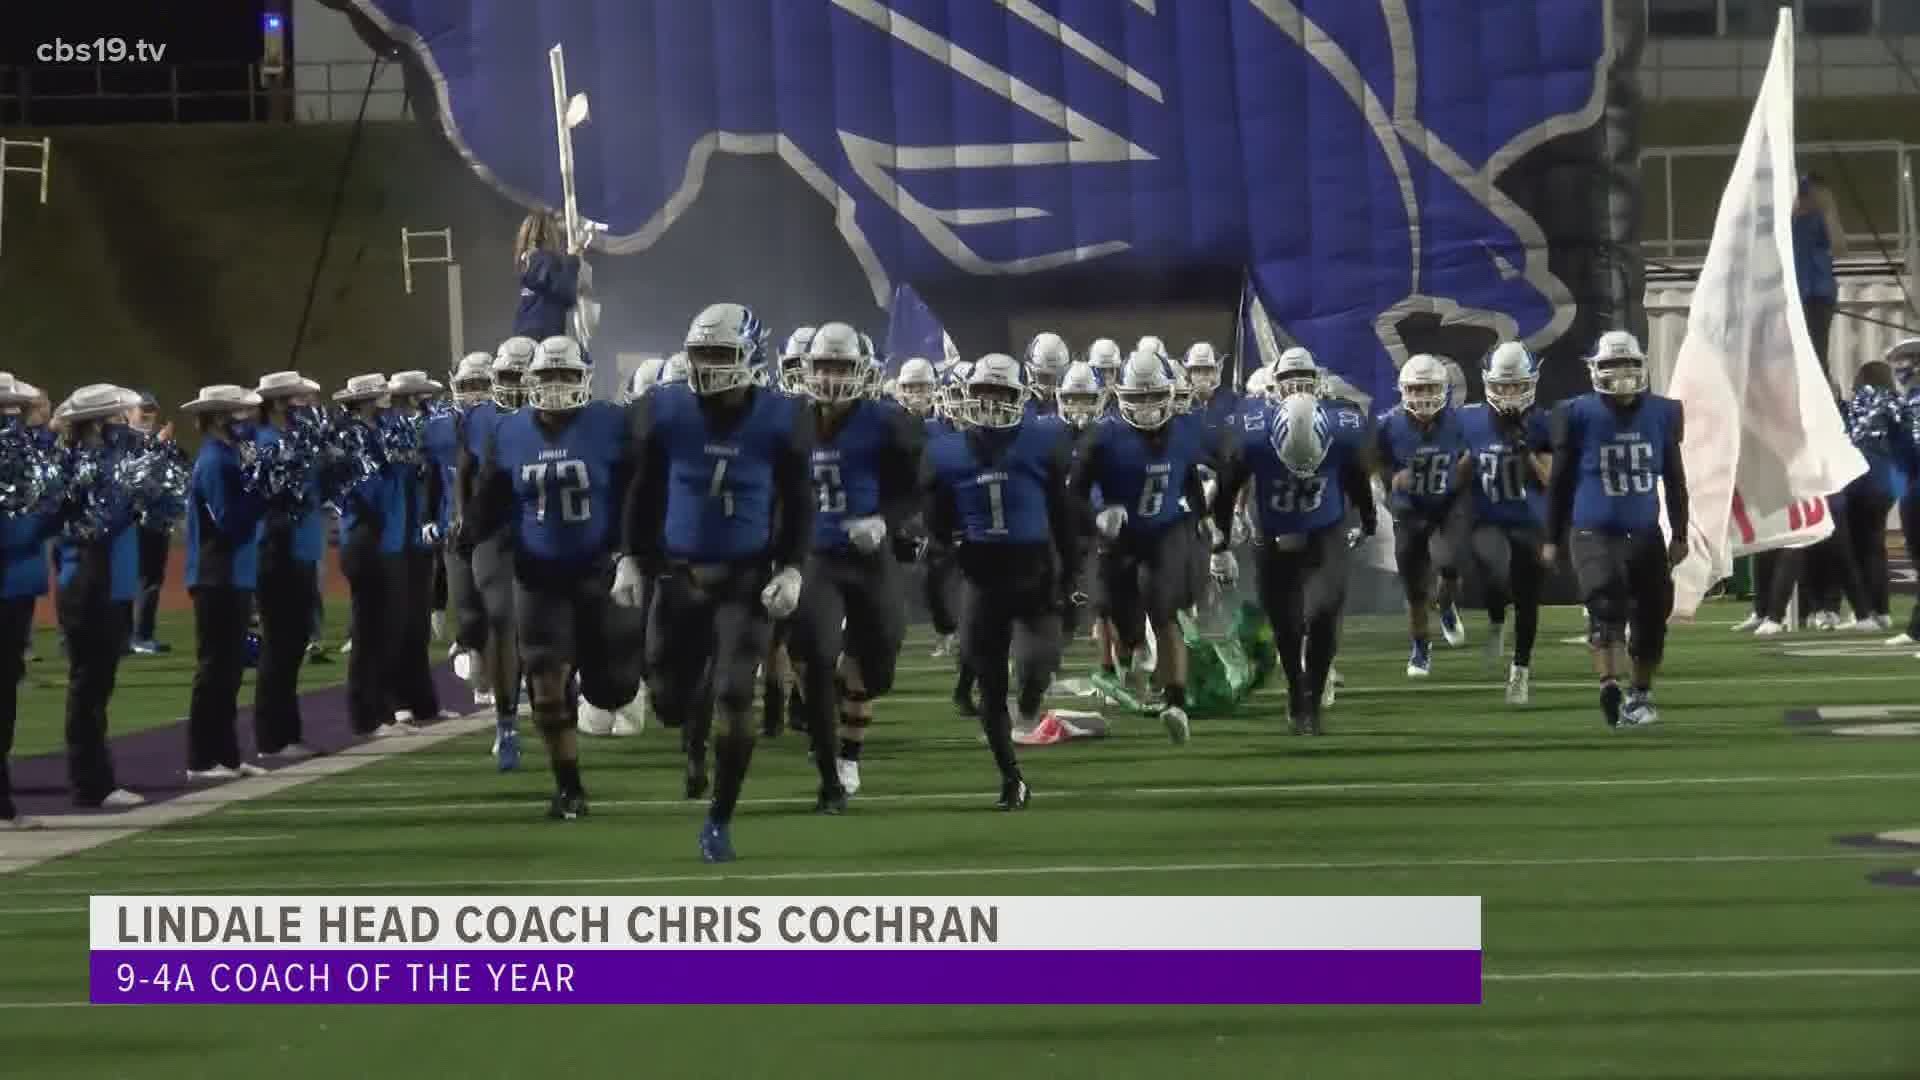 CBS 19 Sports sits down with Lindale Head Coach Chris Cochran to talk about the magical season that was for the Eagles, and Cochran being named the 9-4A COTY.